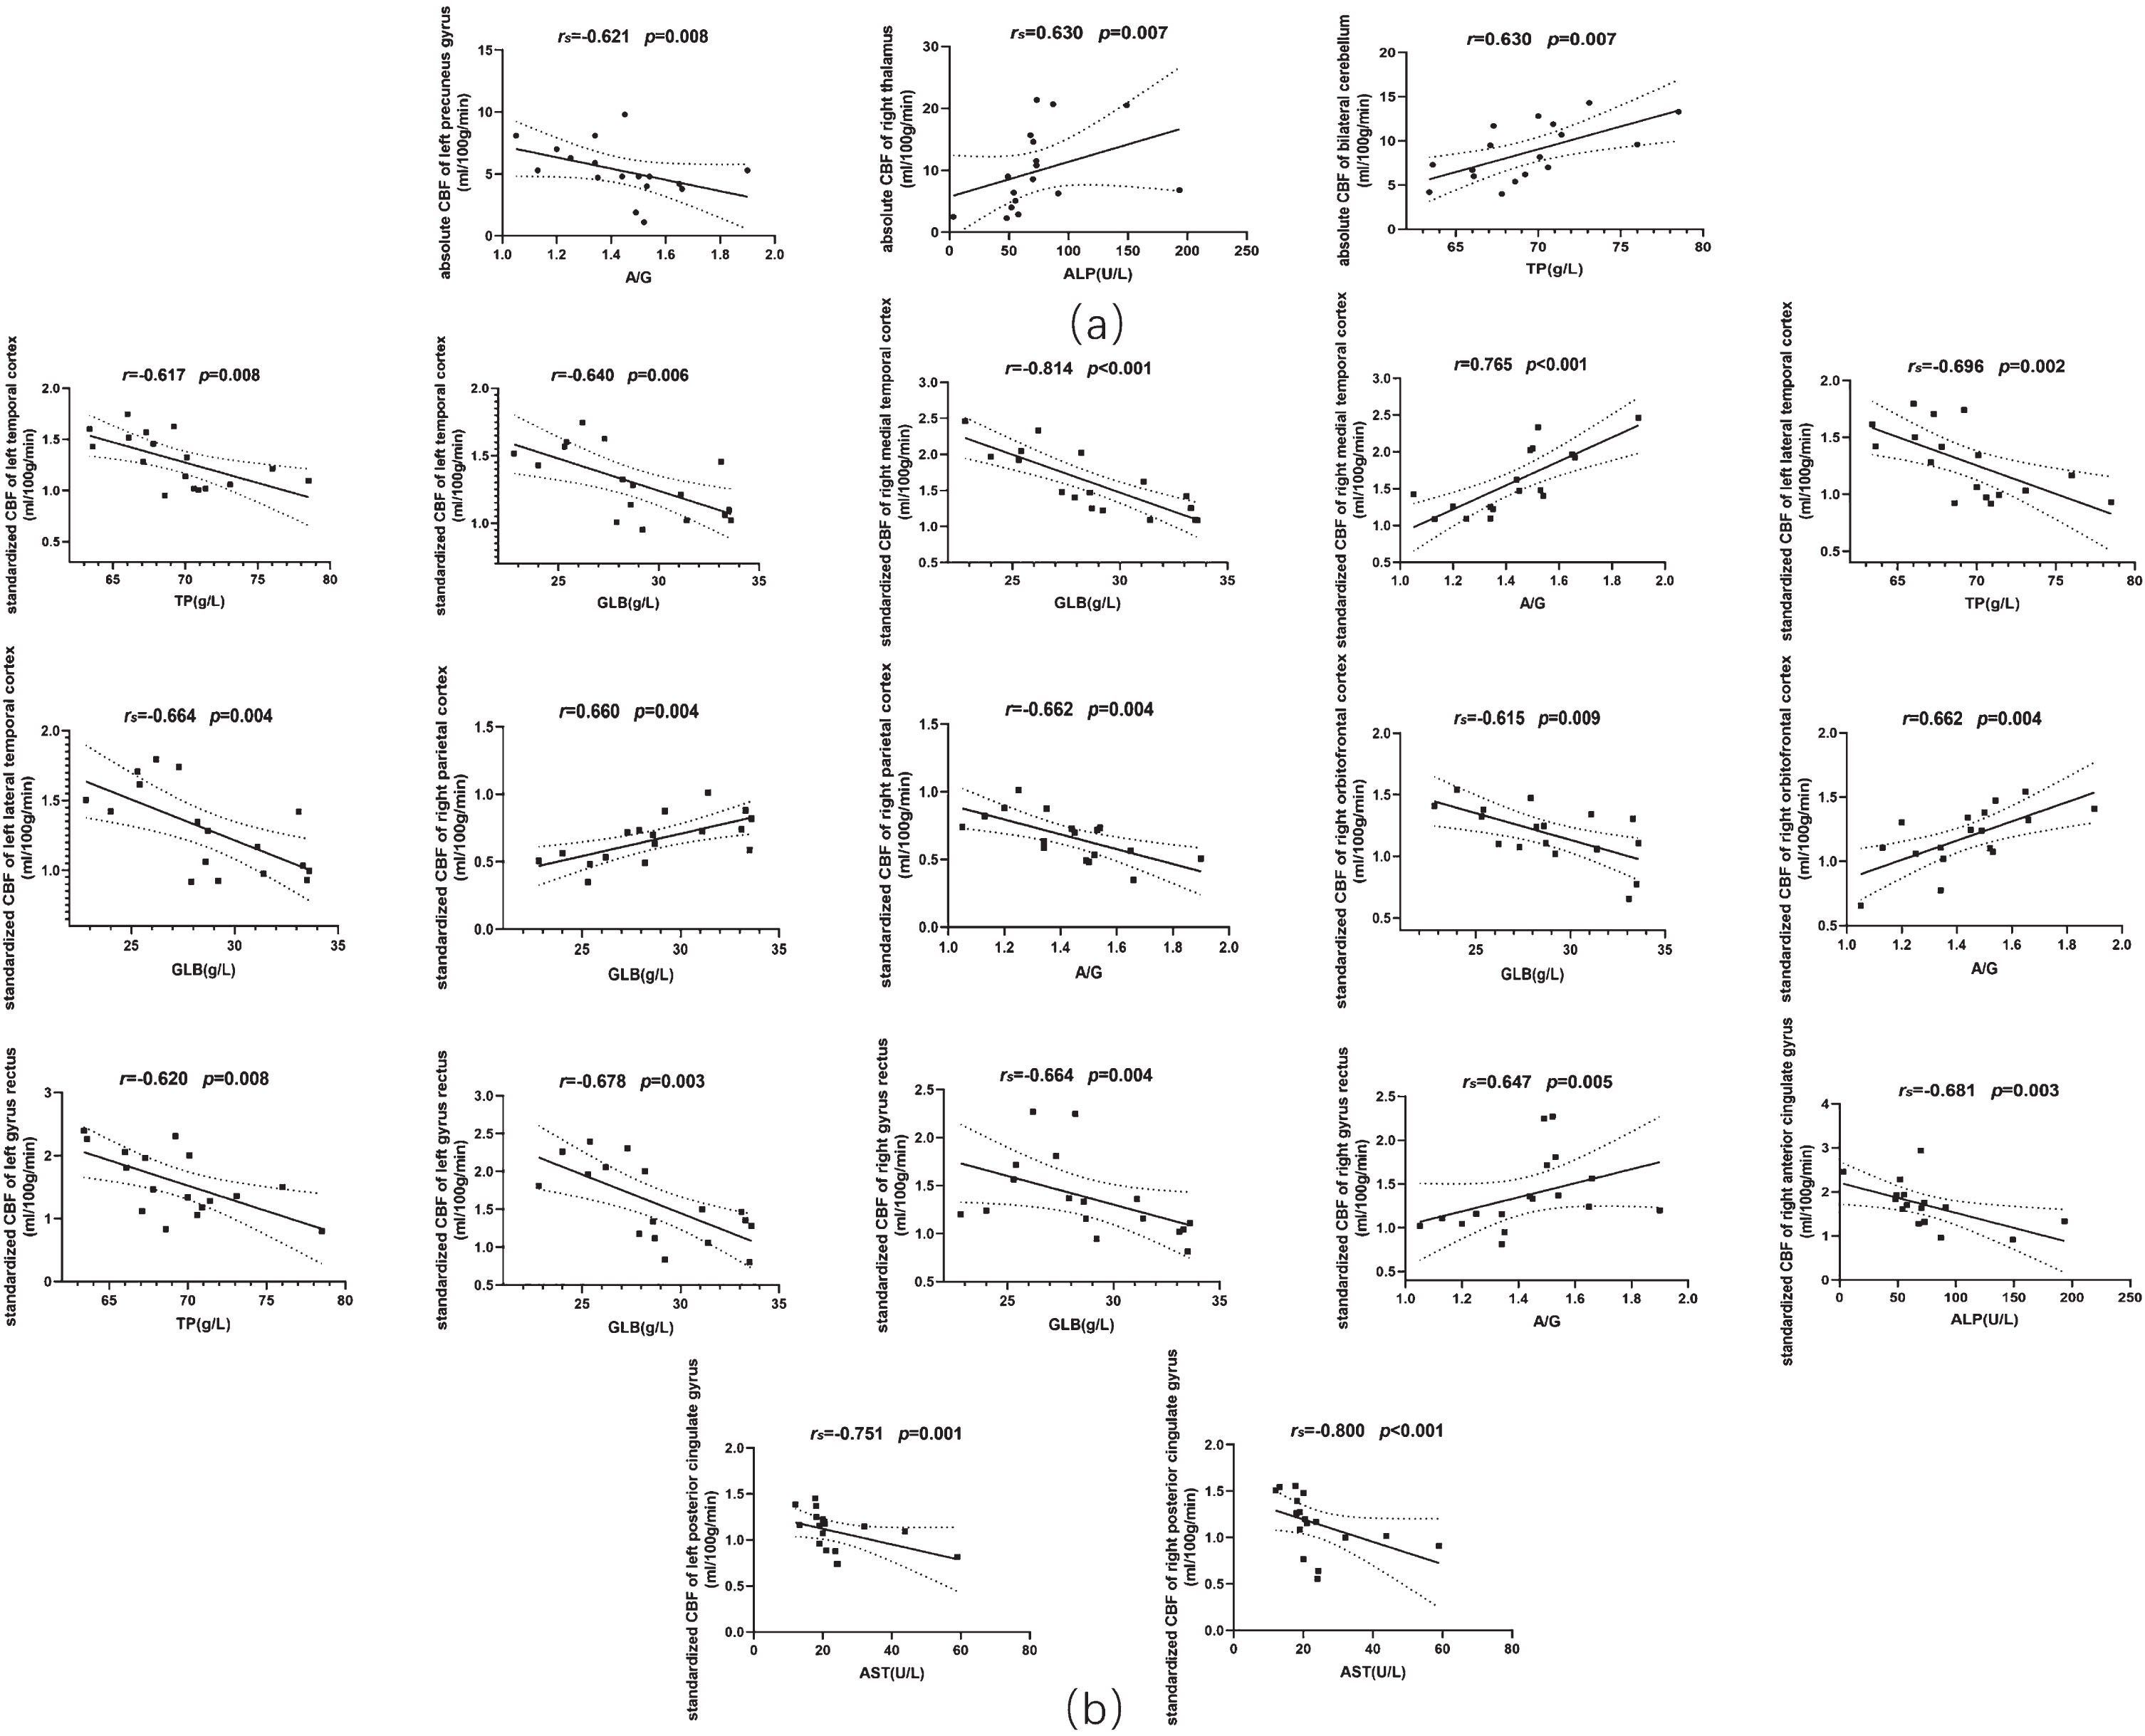 Scatter plots of the correlations between serum liver function markers and regional cerebral blood flow of AD patients. (a) Absolute regional cerebral blood flow. (b) Standardized regional cerebral blood flow. CBF, cerebral blood flow; TP, total protein; GLB, globin; A/G, the ratio of albumin to globin; ALP, alkaline phosphatase; AST, aspartate aminotransferase.